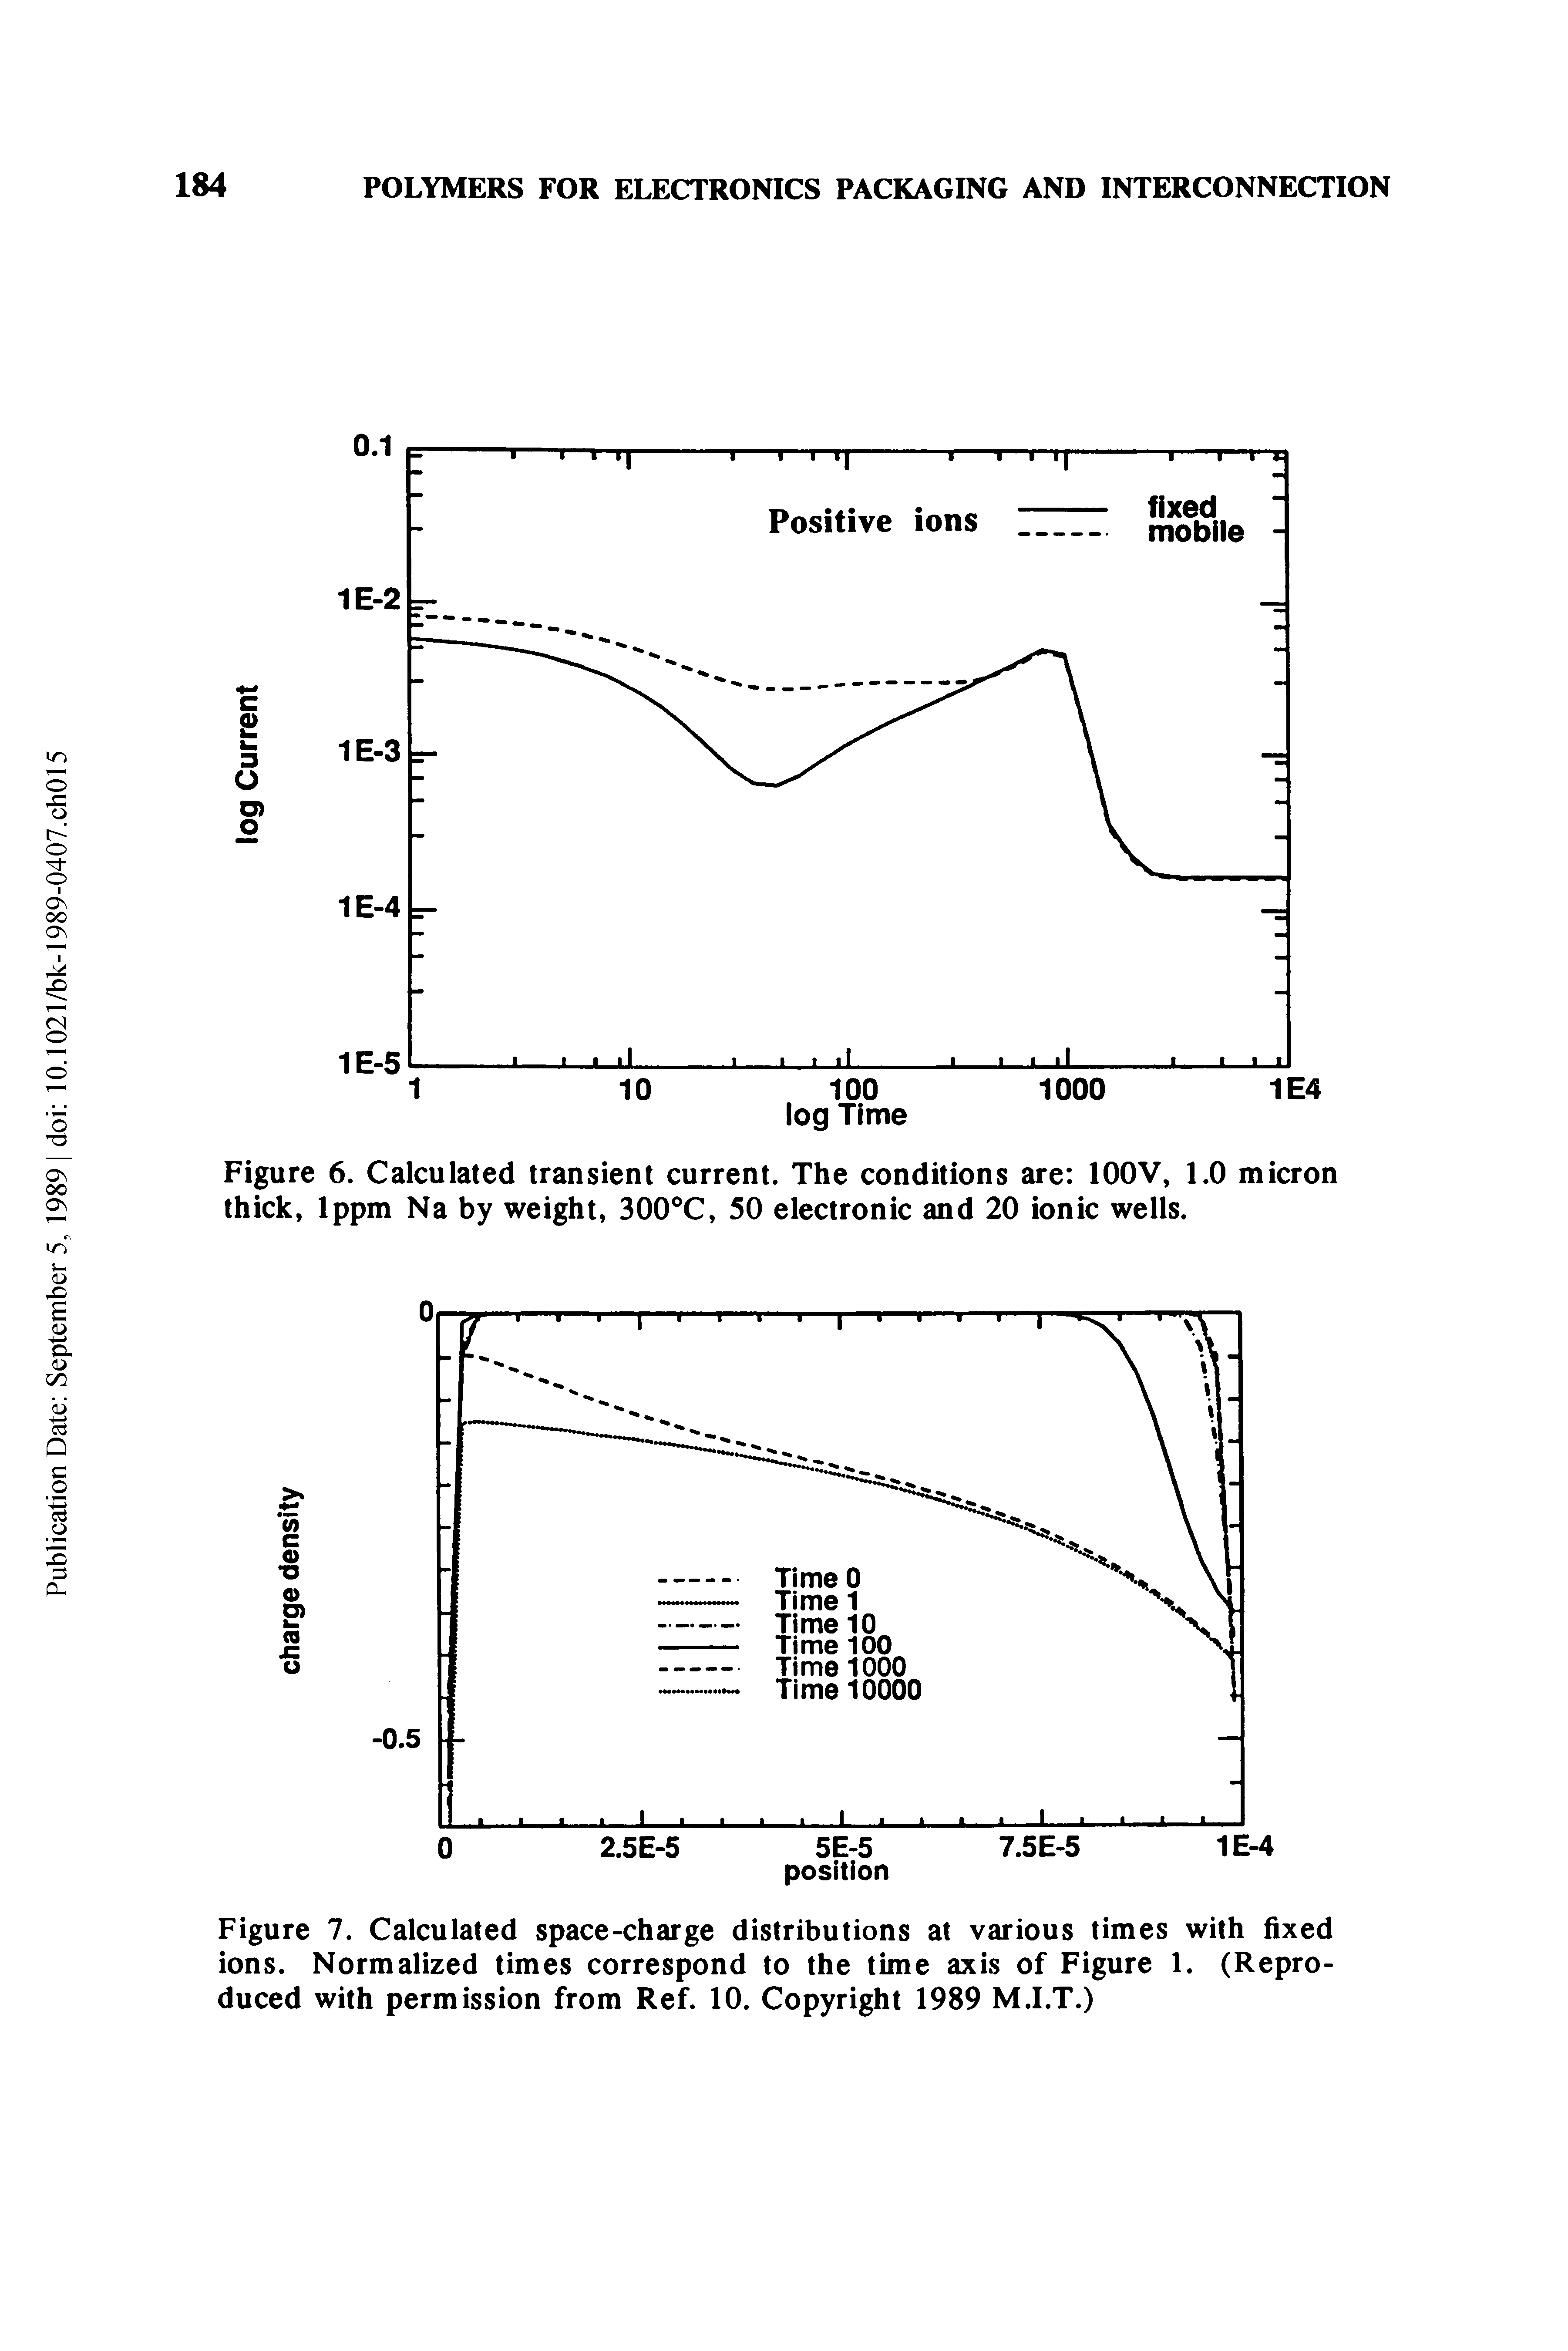 Figure 7. Calculated space-charge distributions at various times with fixed ions. Normalized times correspond to the time axis of Figure 1. (Reproduced with permission from Ref. 10. Copyright 1989 M.I.T.)...